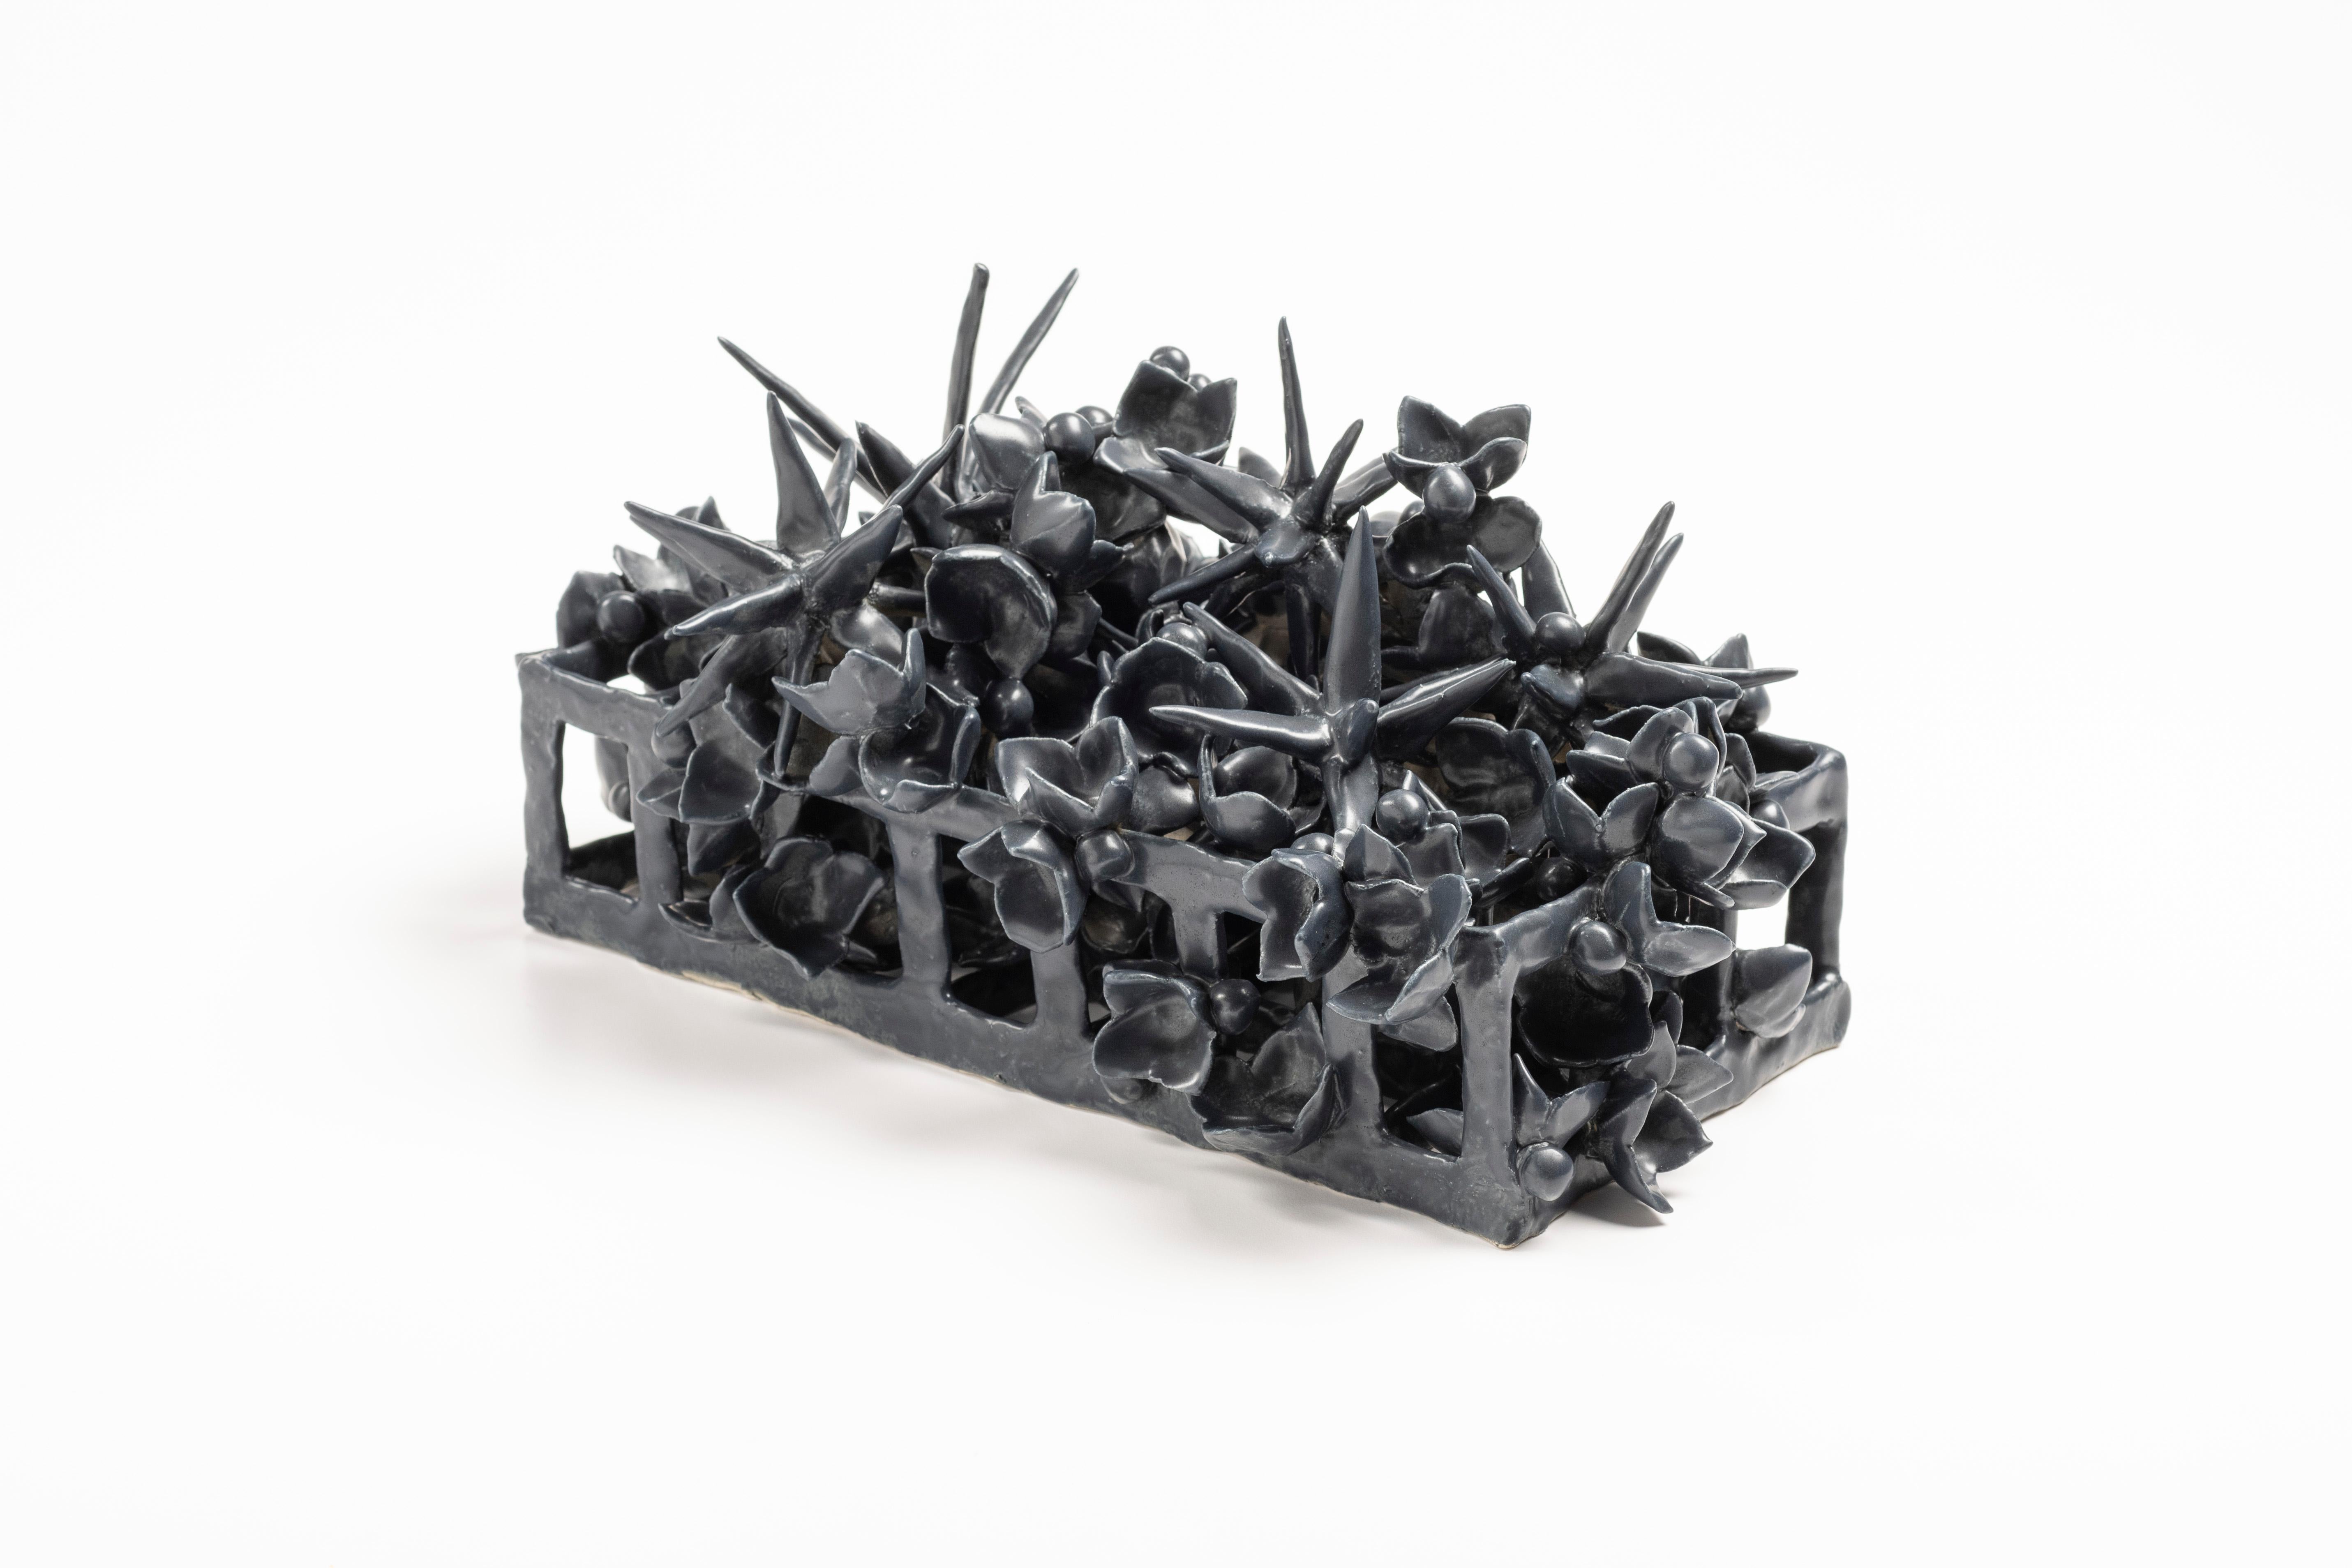 Contemporary American ceramic artist Joanna Poag's Binding Time (Black Grid with Stars) table top sculpture is part of a series. It's hand built clay, high fired to cone 6 with glaze. Binding Time explores entropy as it relates to personal